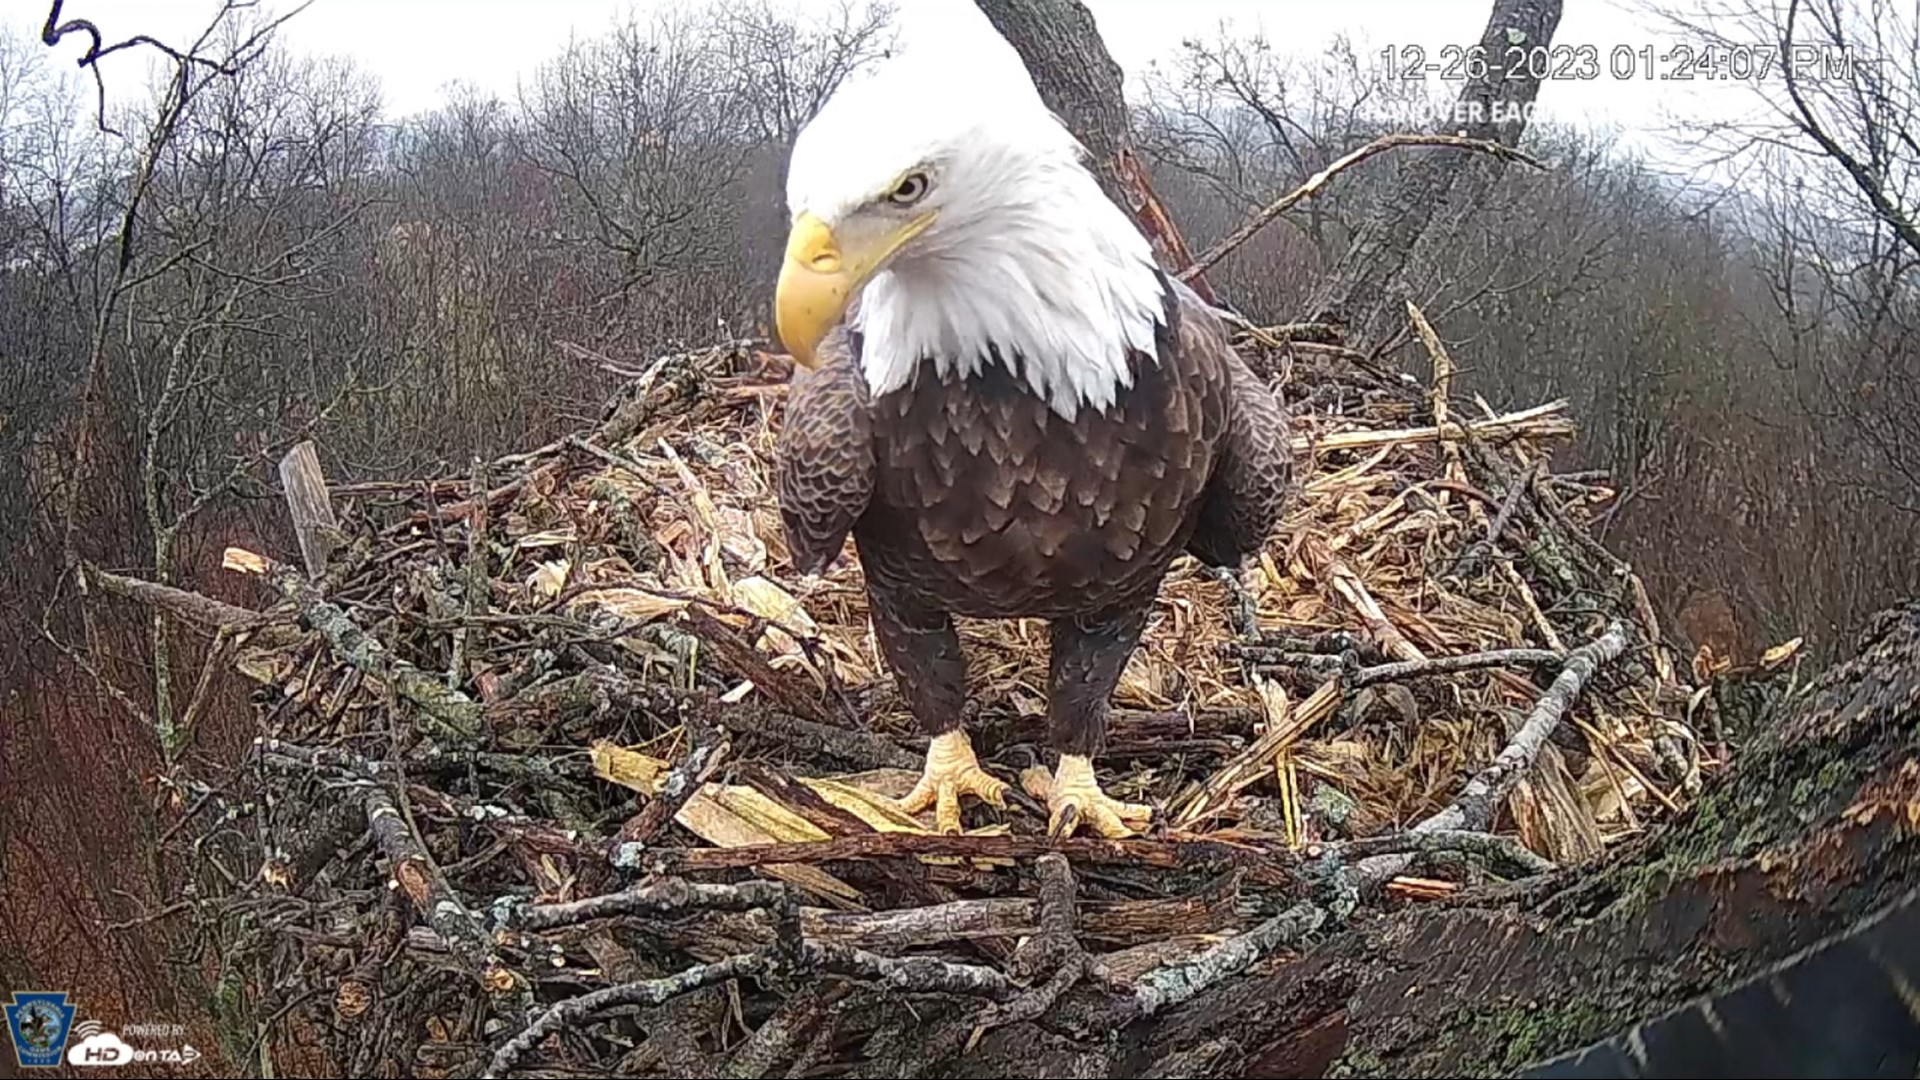 Power to the Hanover eagle livestream camera was restored on Christmas day after the community raised over $10,000 in less than a week to fund repairs.